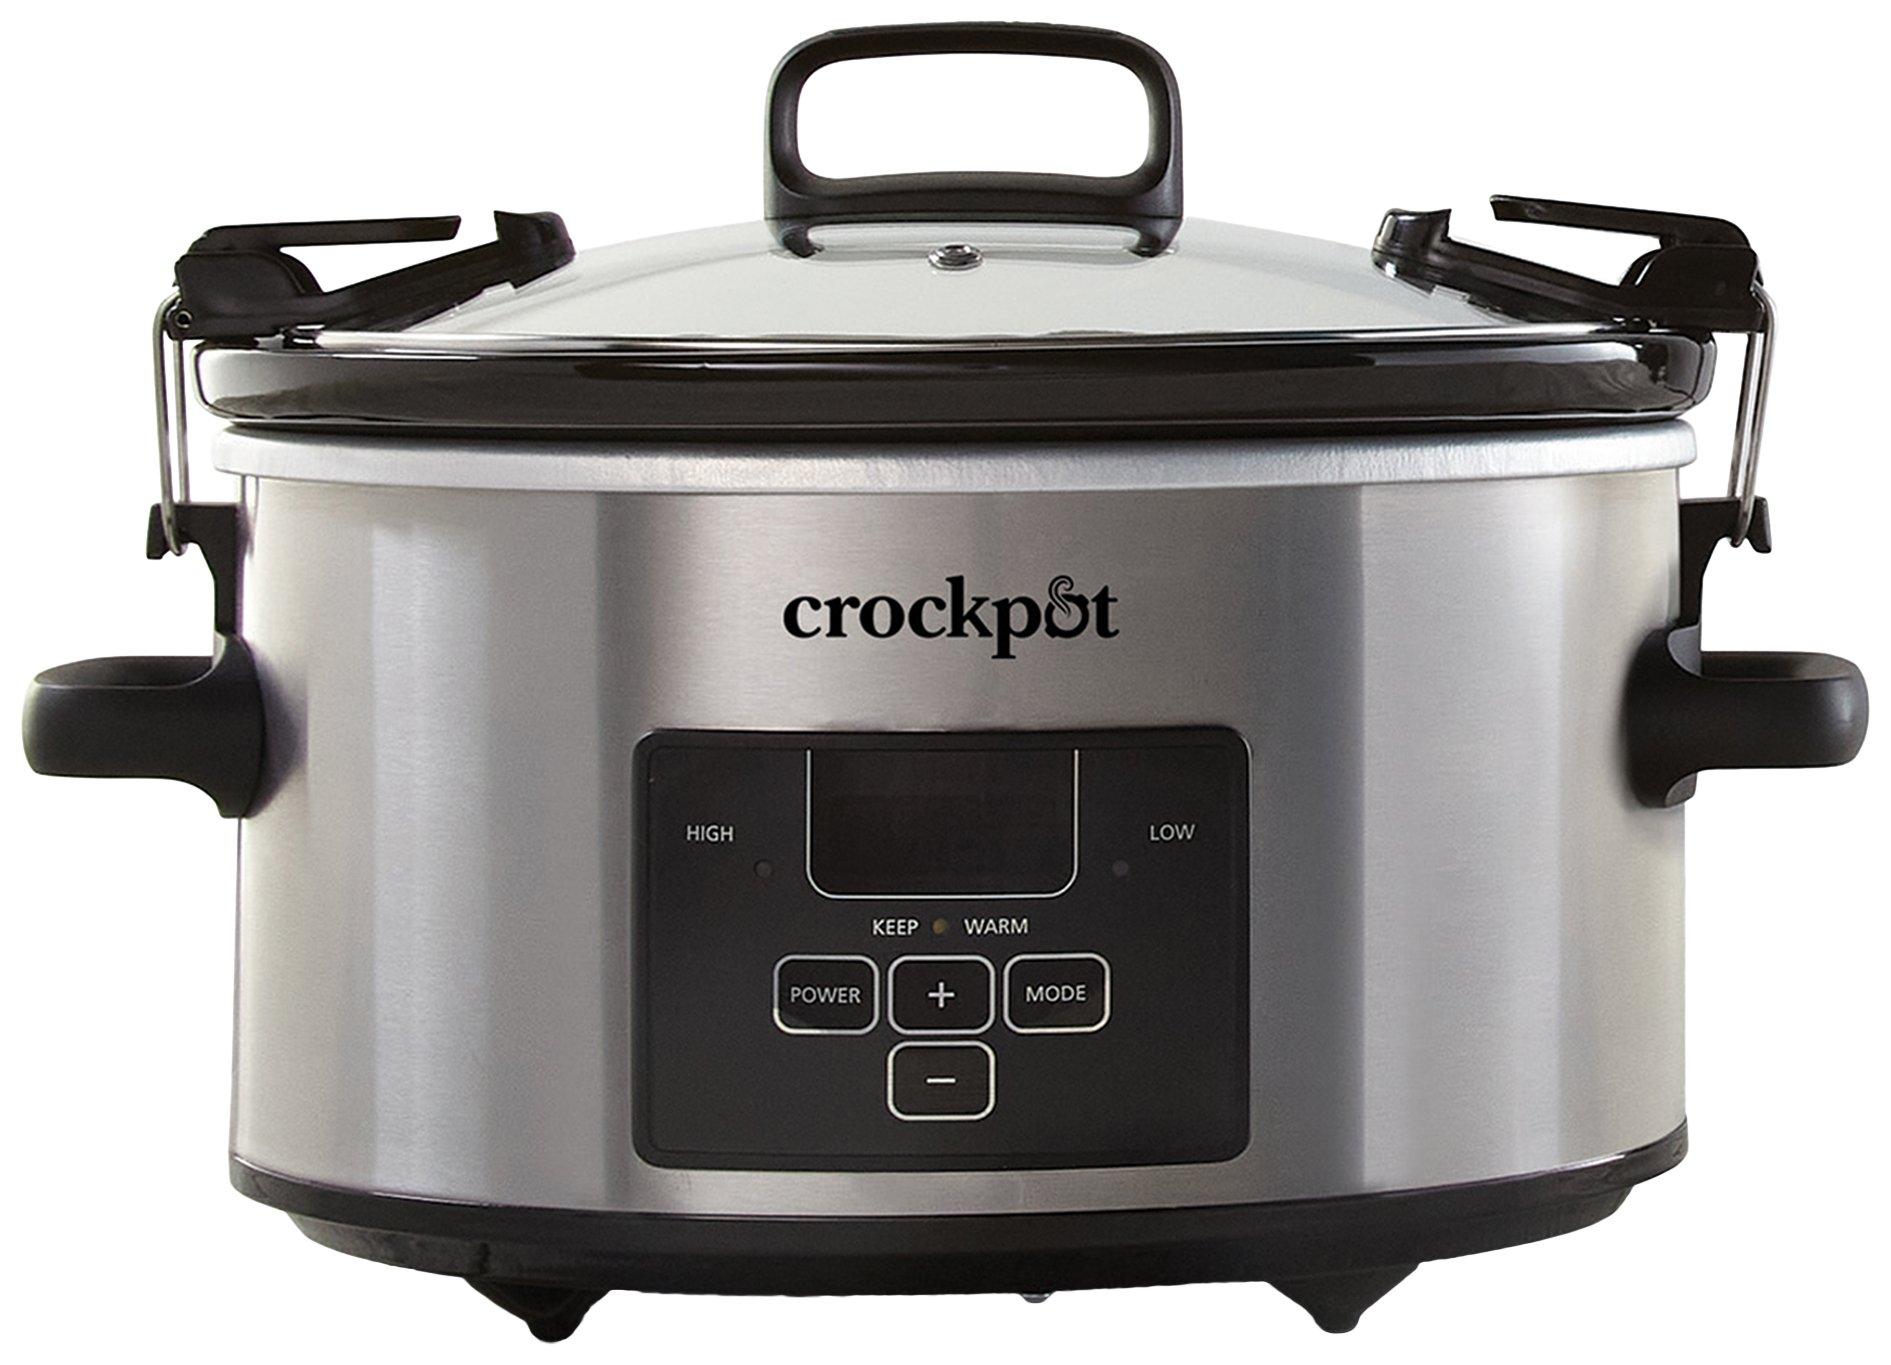 4 Quart Stainless Steel Slow Cooker